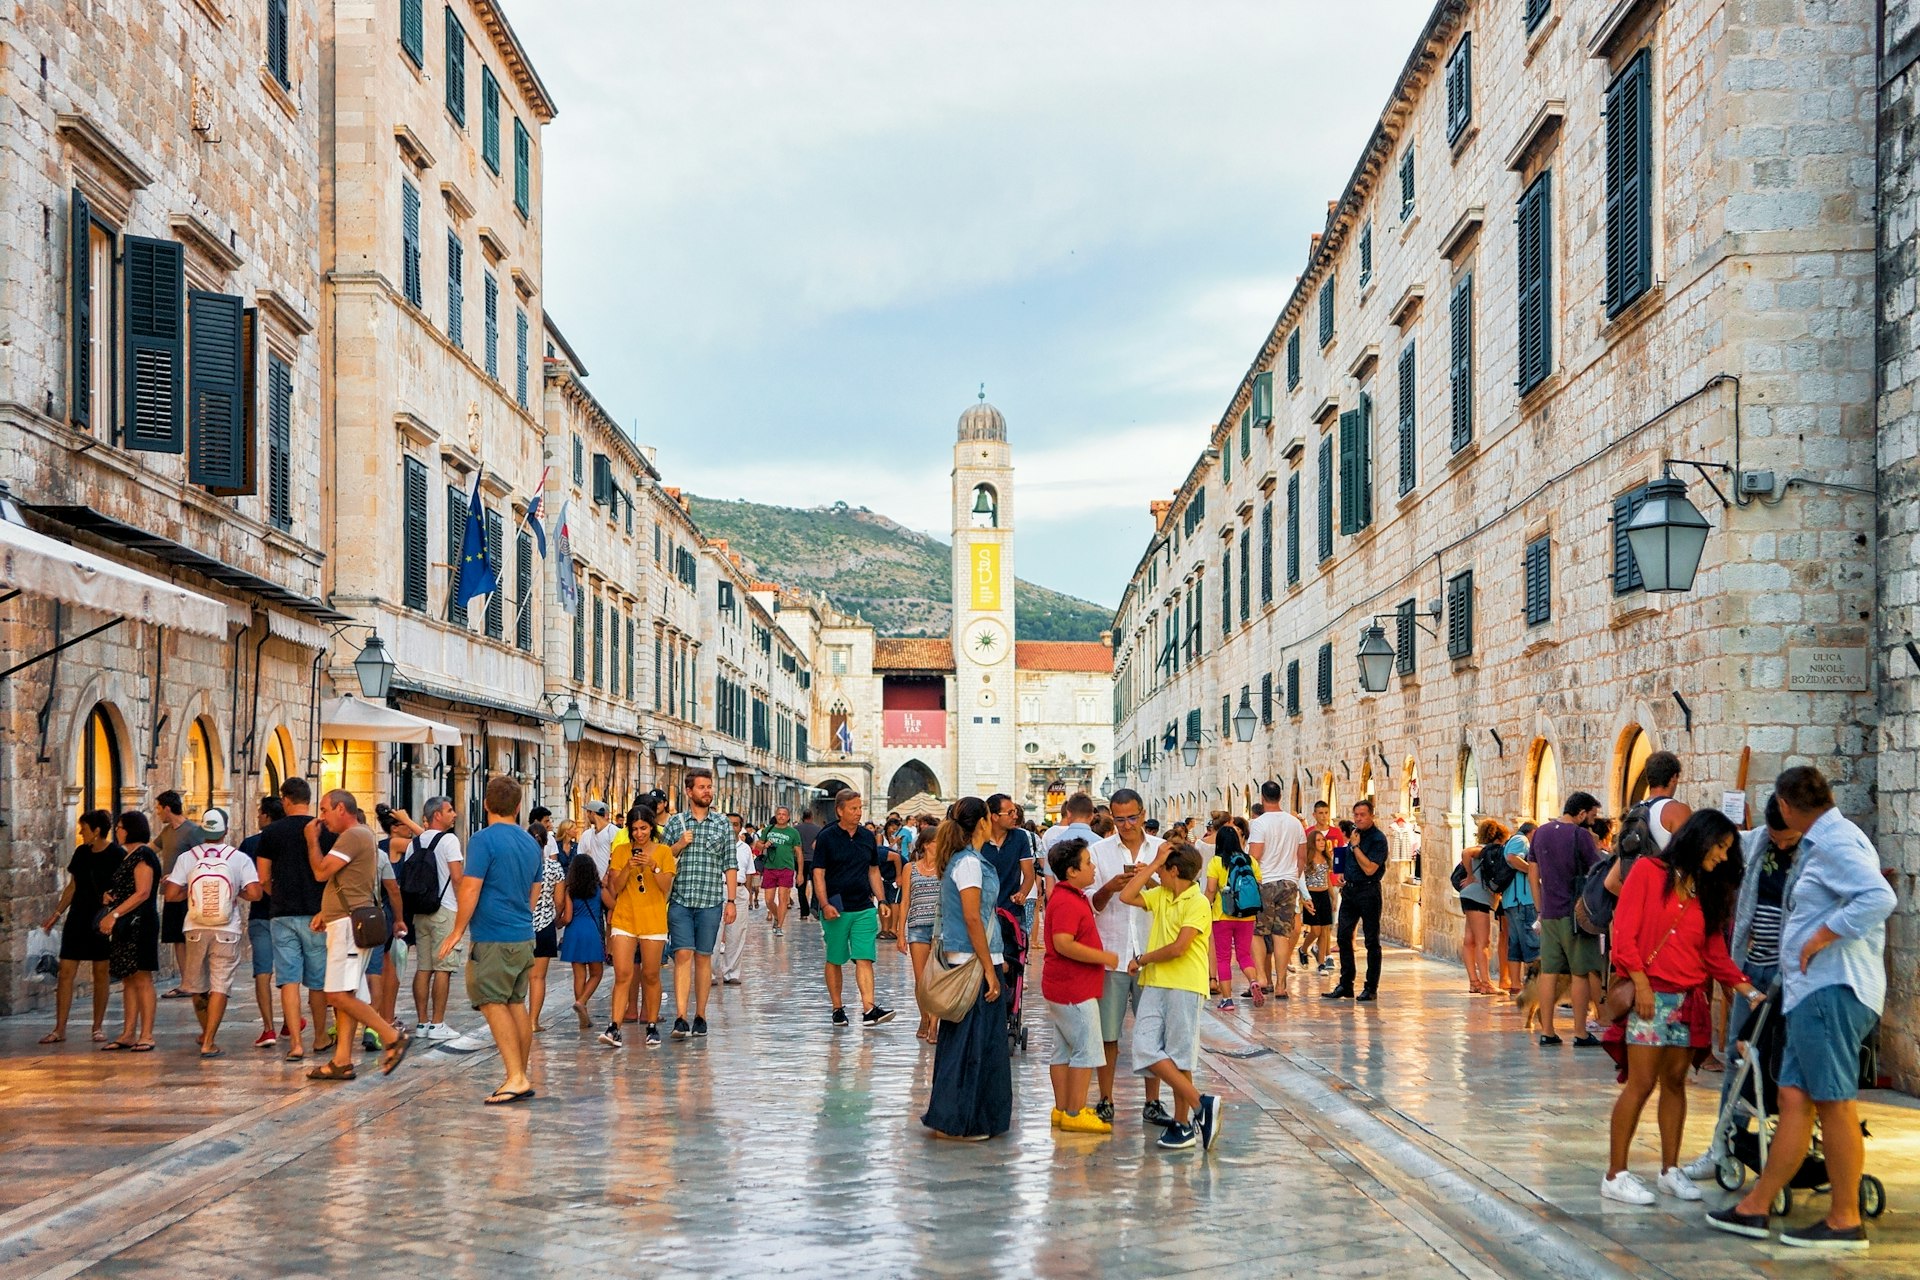 Tourists stroll along Stradun in the old town of Dubrovnik